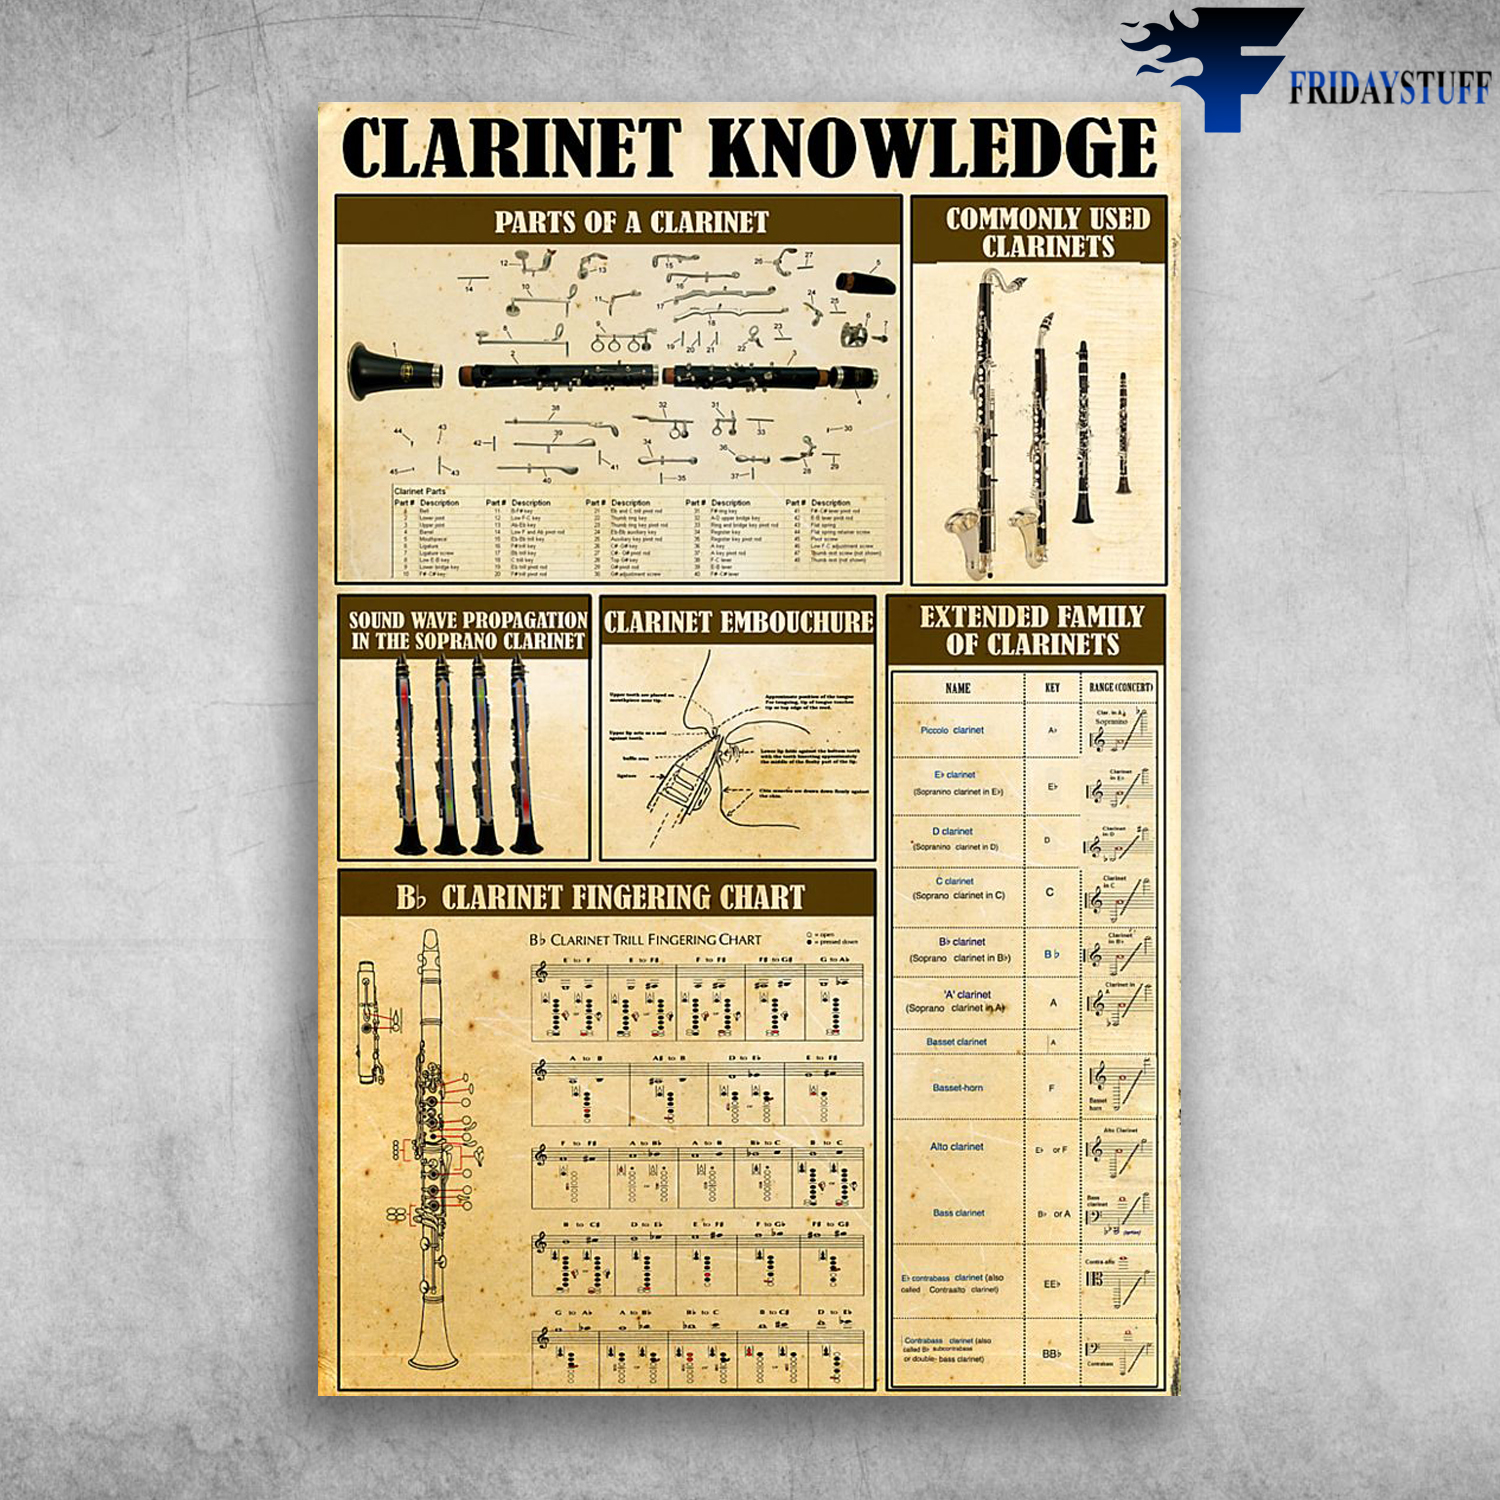 Clarinet Knowledge Parts Of A Clarinet Commonly Used Clarinets